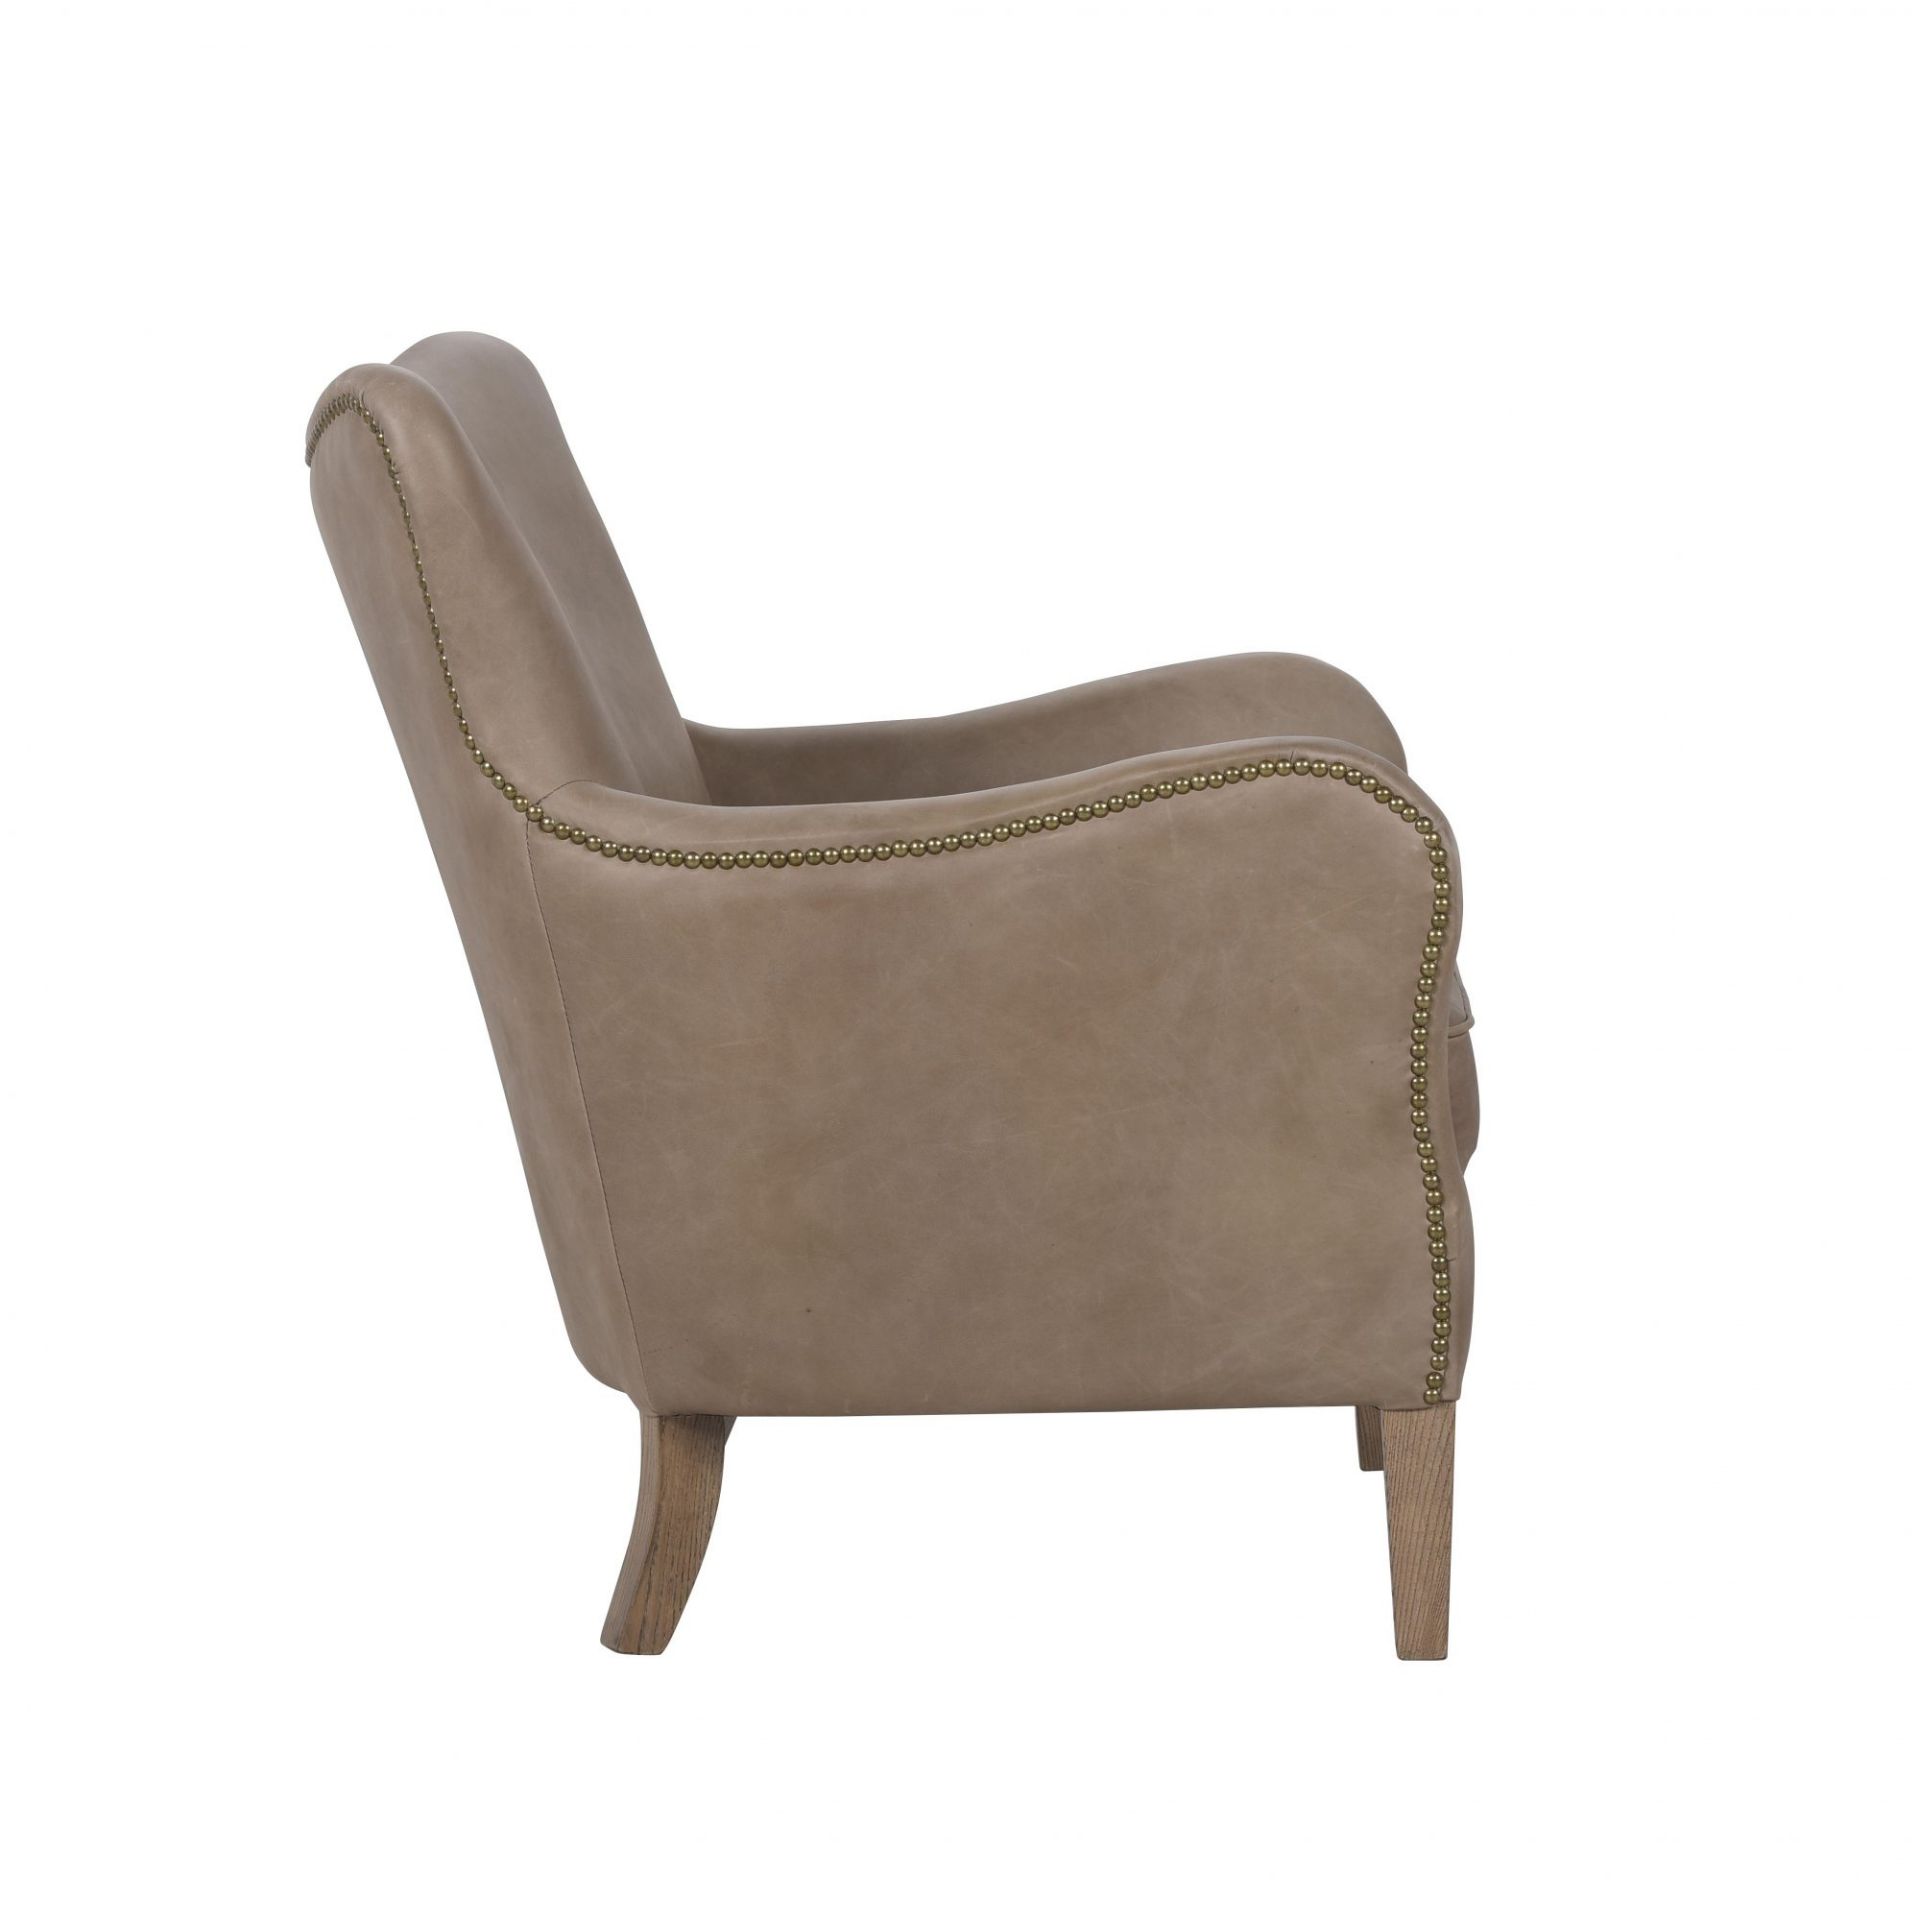 Dyce Leather Chair The Dyce Is A Mid-Century Inspired Armchair With Soft Subtle Curves, Mid-Height - Image 2 of 2